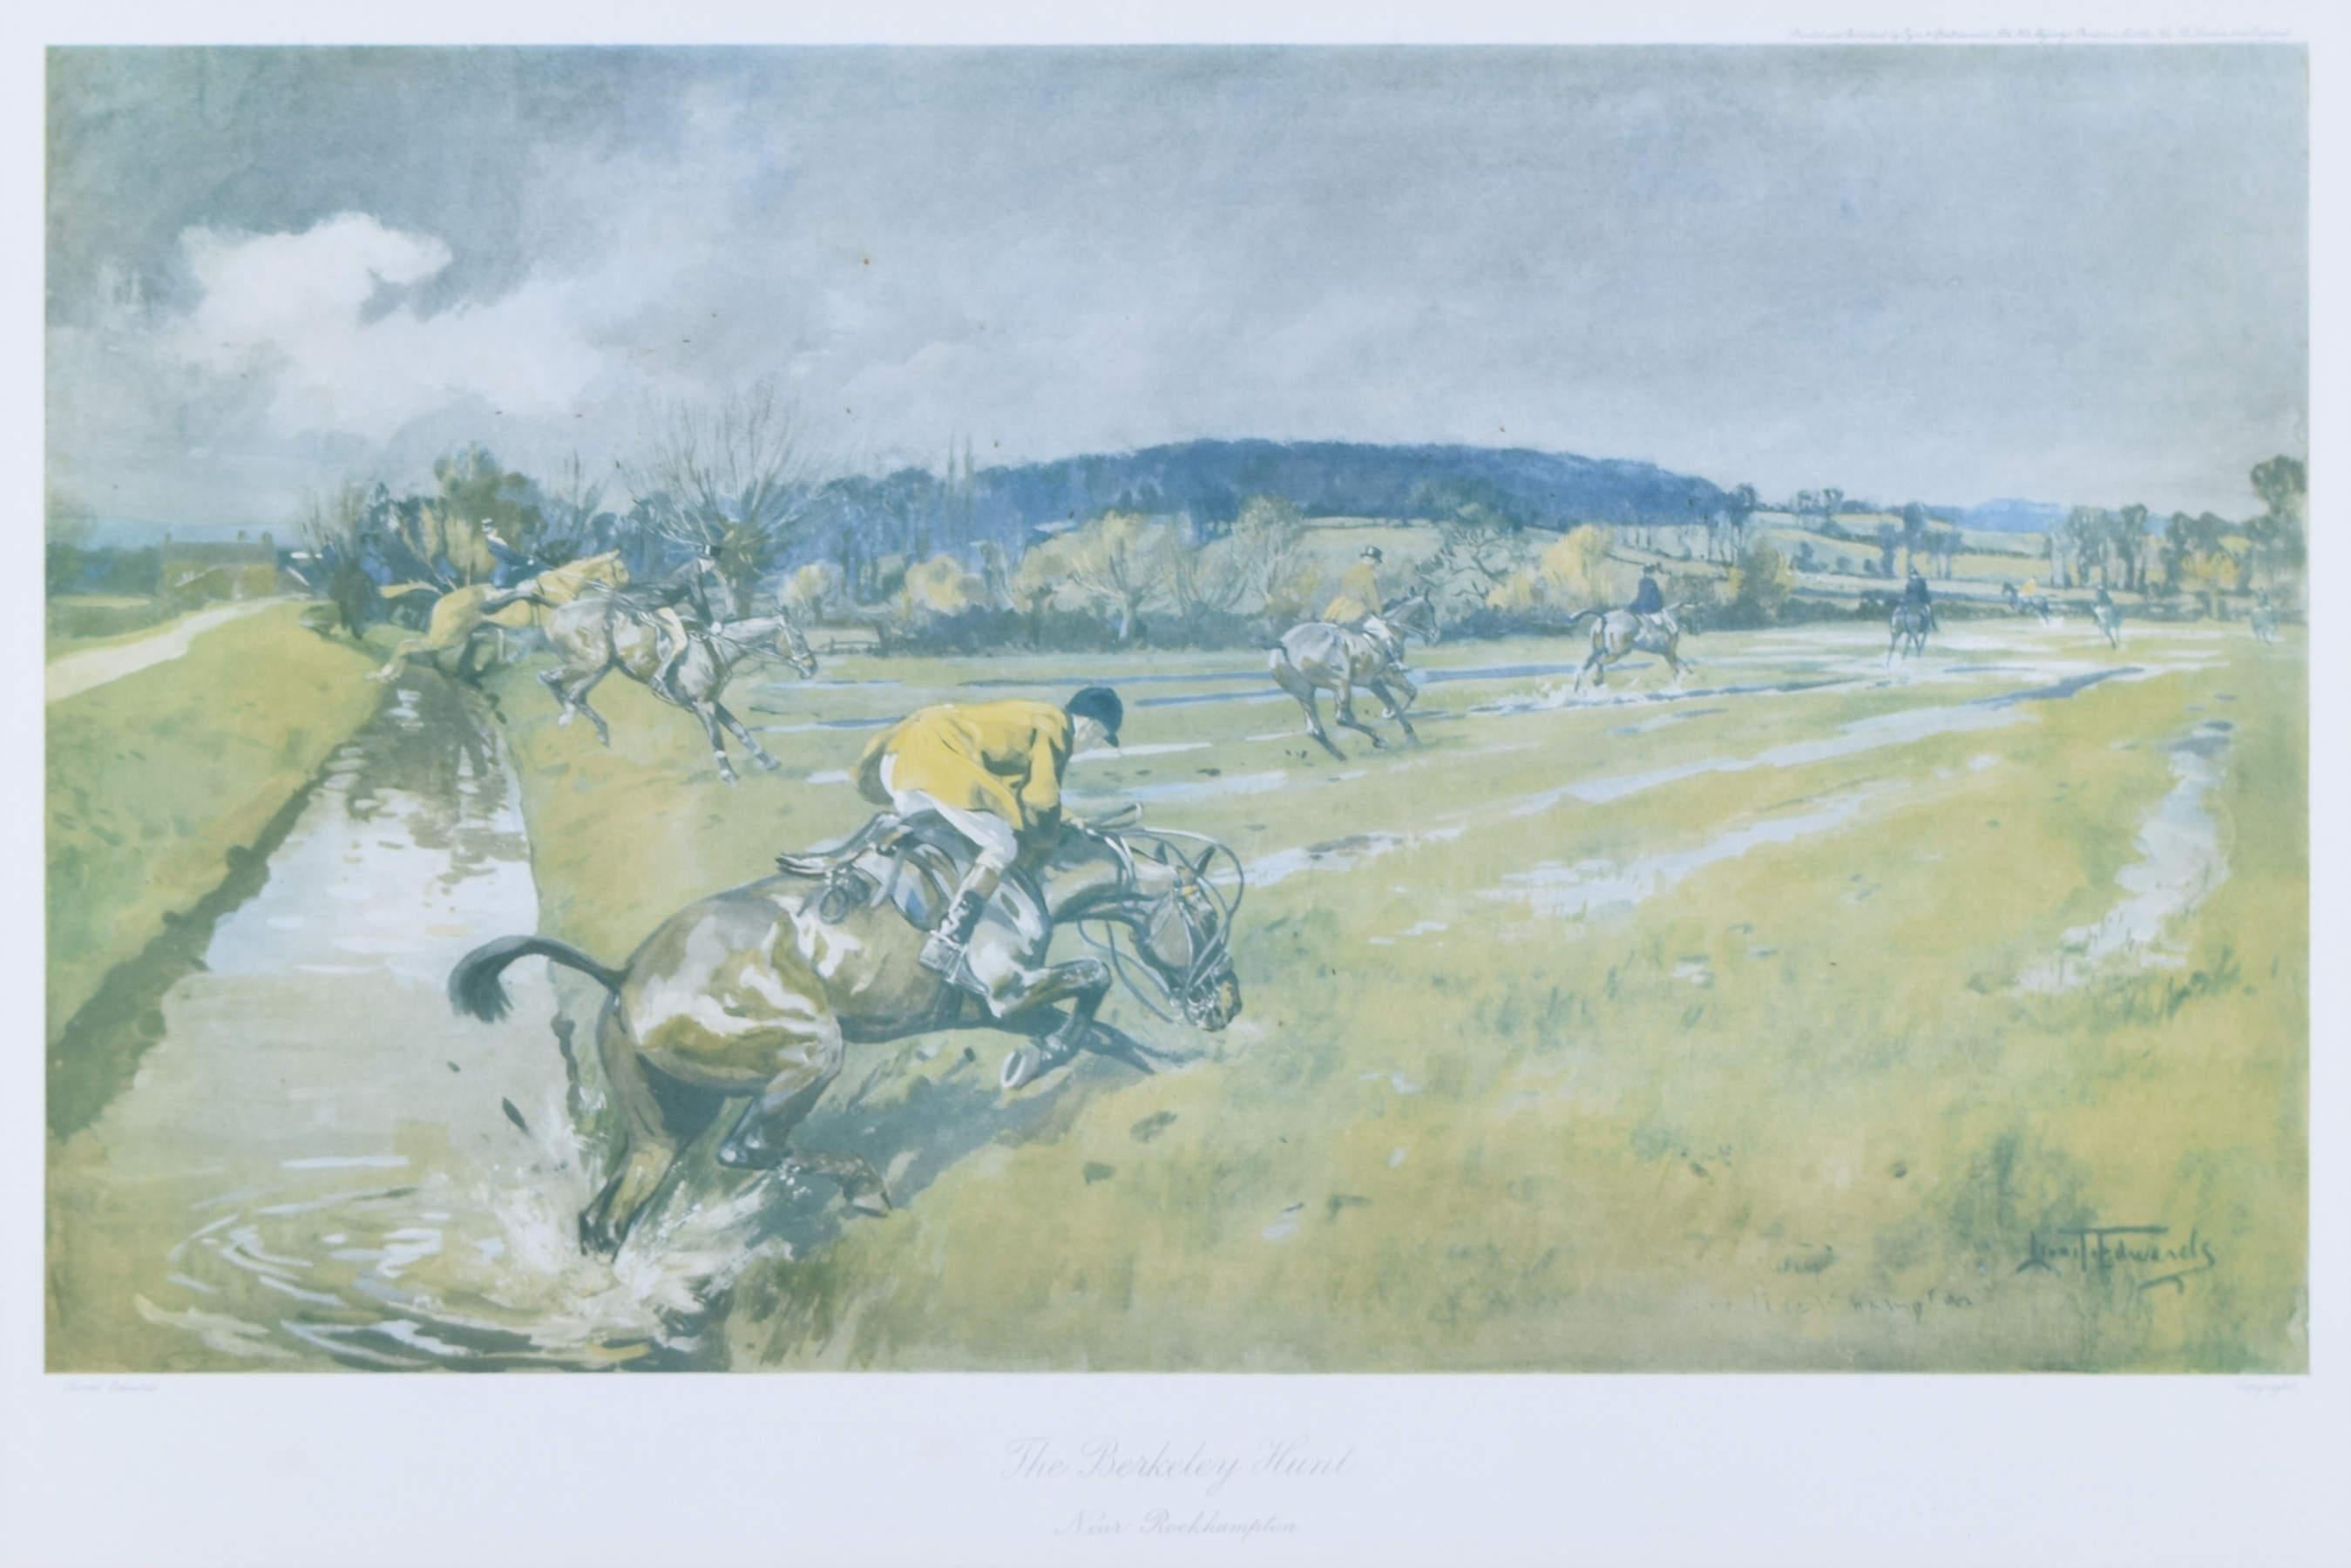 To see our other hunting pictures, scroll down to "More from this Seller" and below it click on "See all from this Seller" and then search.

Lionel Edwards (1878 - 1966)
The Berkeley Hunt - Near Rockhampton (1925)
Lithograph
34 x 51 cm

Signed in